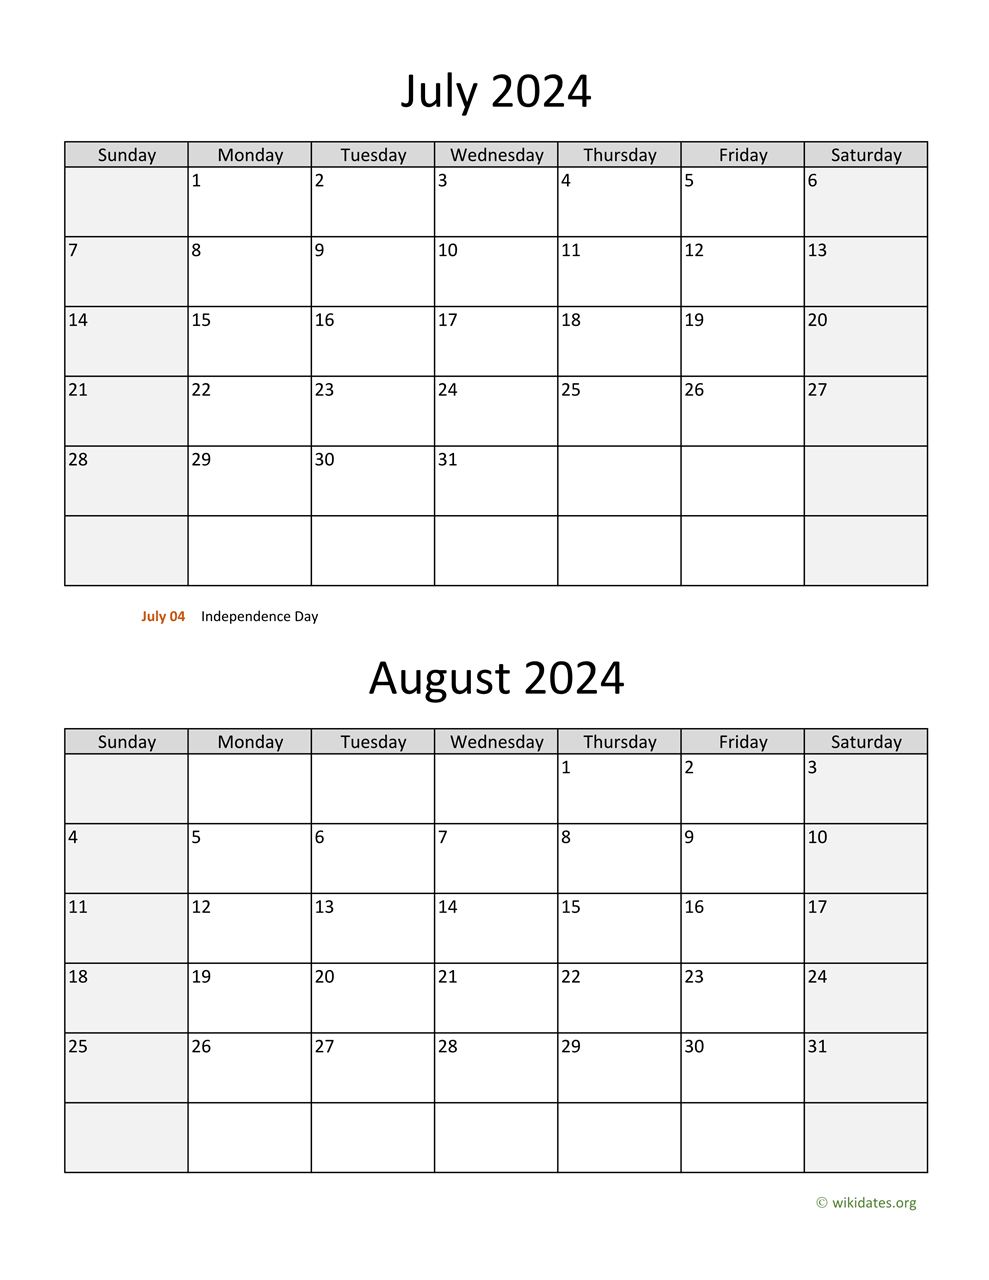 July And August 2024 Calendar | Wikidates for Free Printable Calendar 2024 July And August